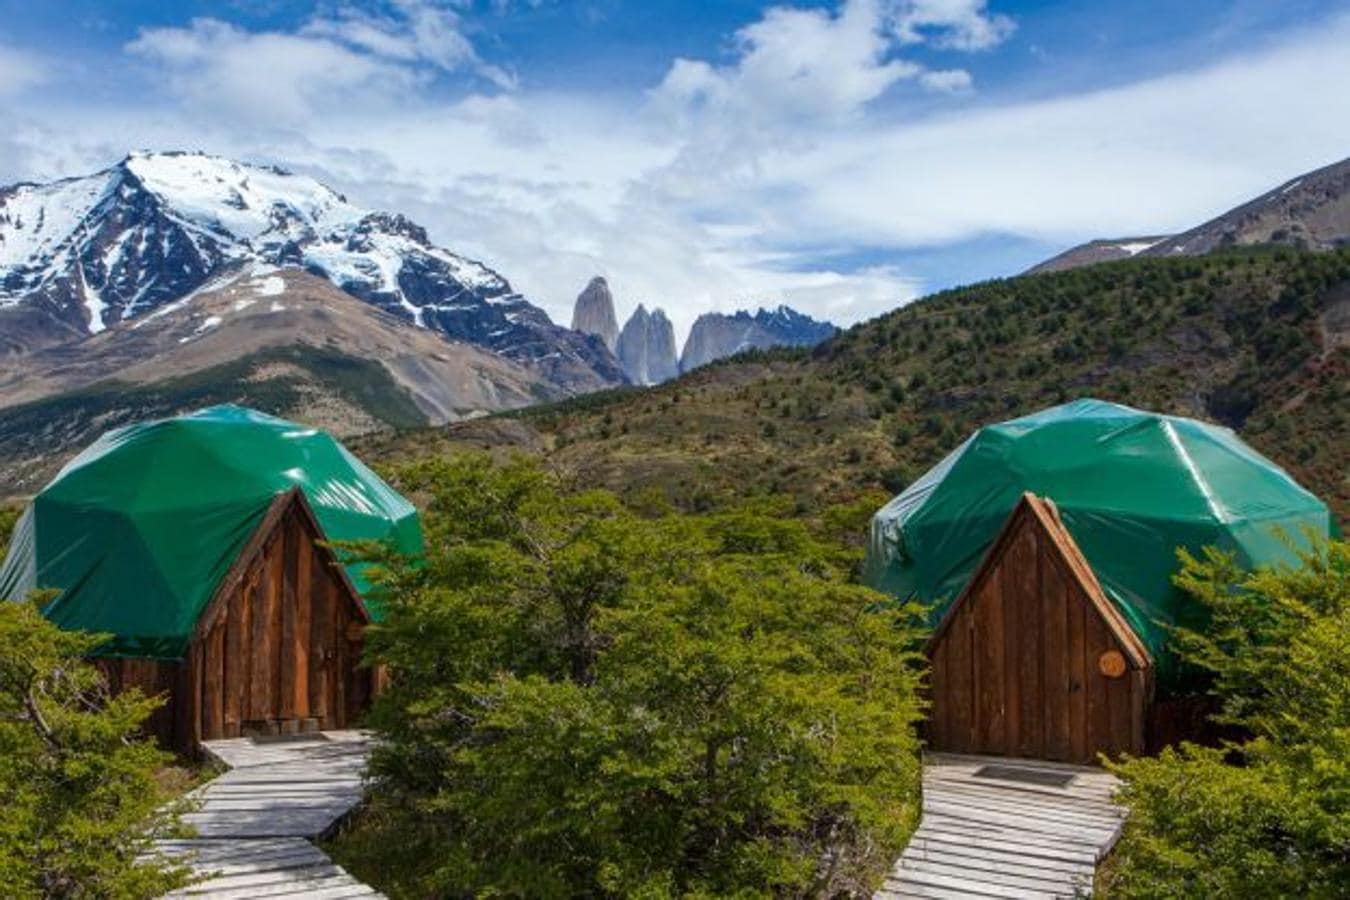 Hotel EcoCamp Patagonia (Torres del Paine National Park, Chile)